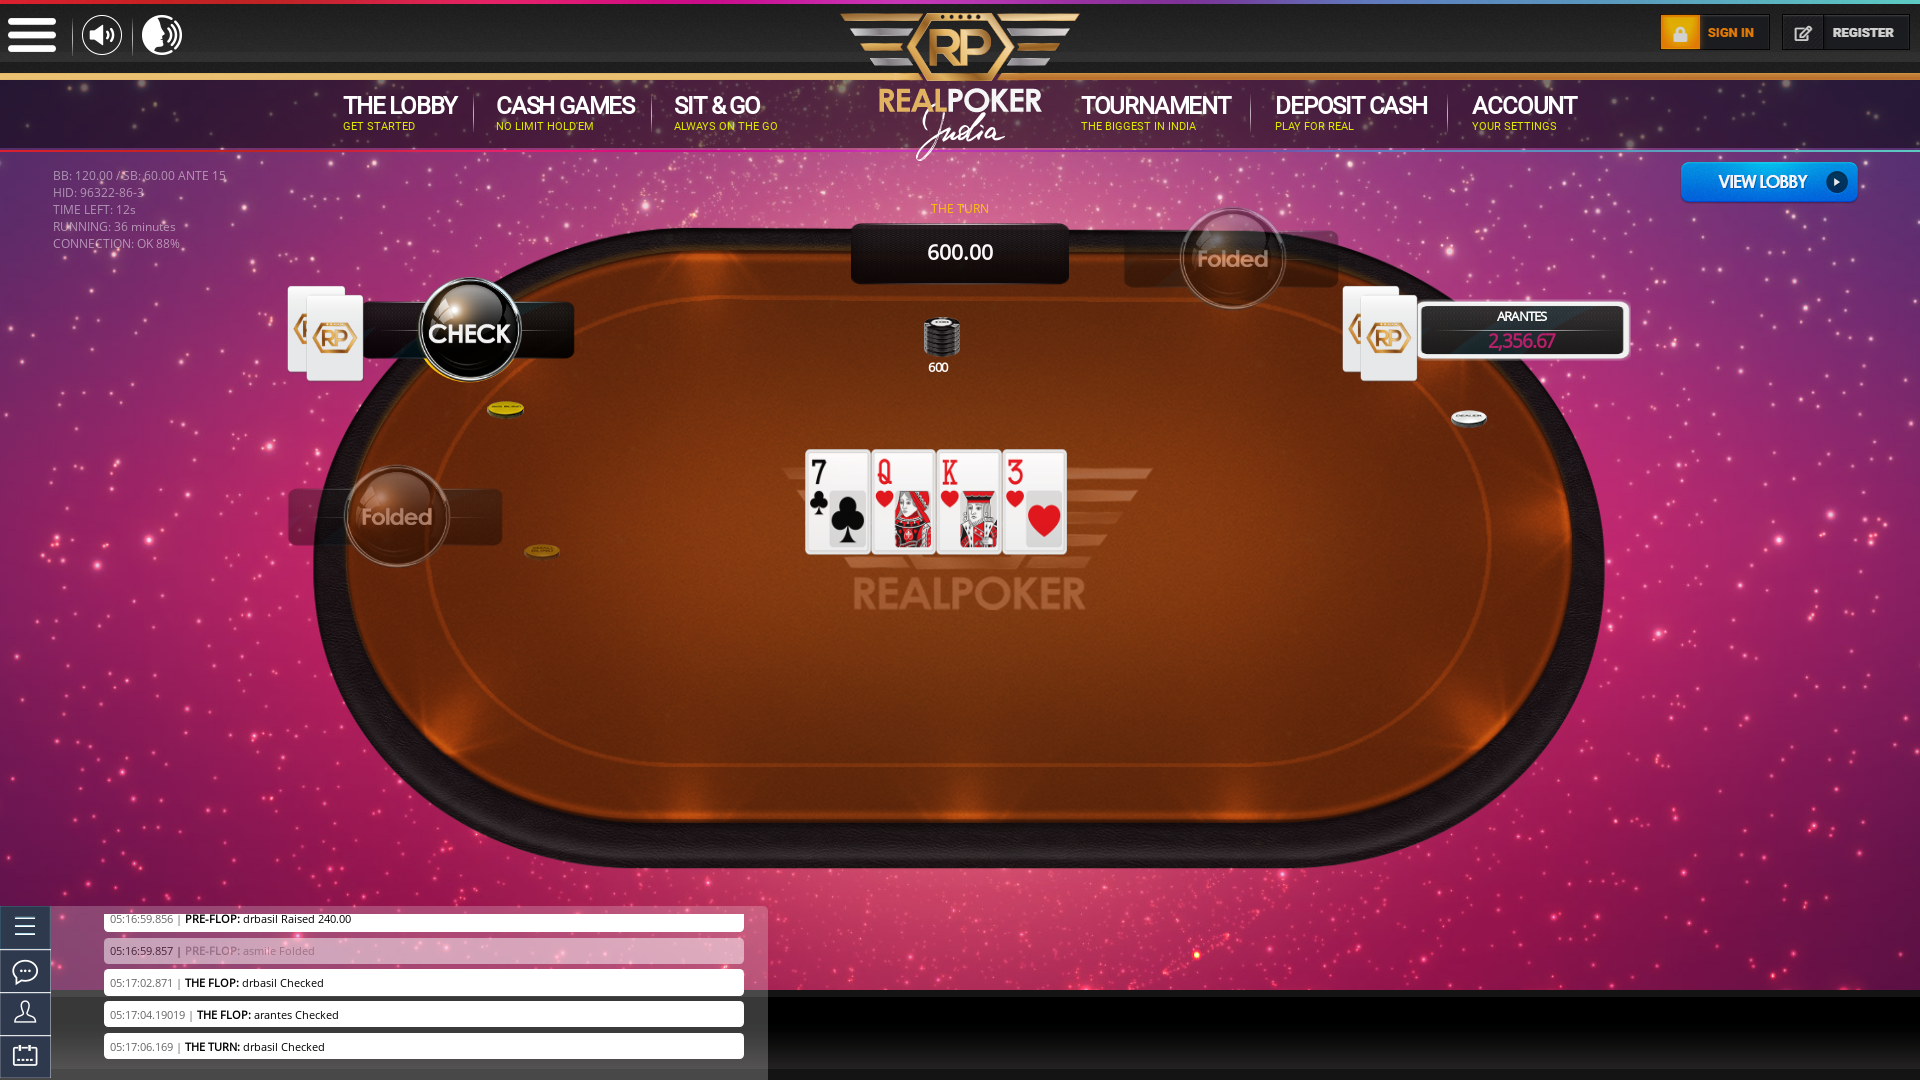 Online poker on a 10 player table in the 35th minute match up